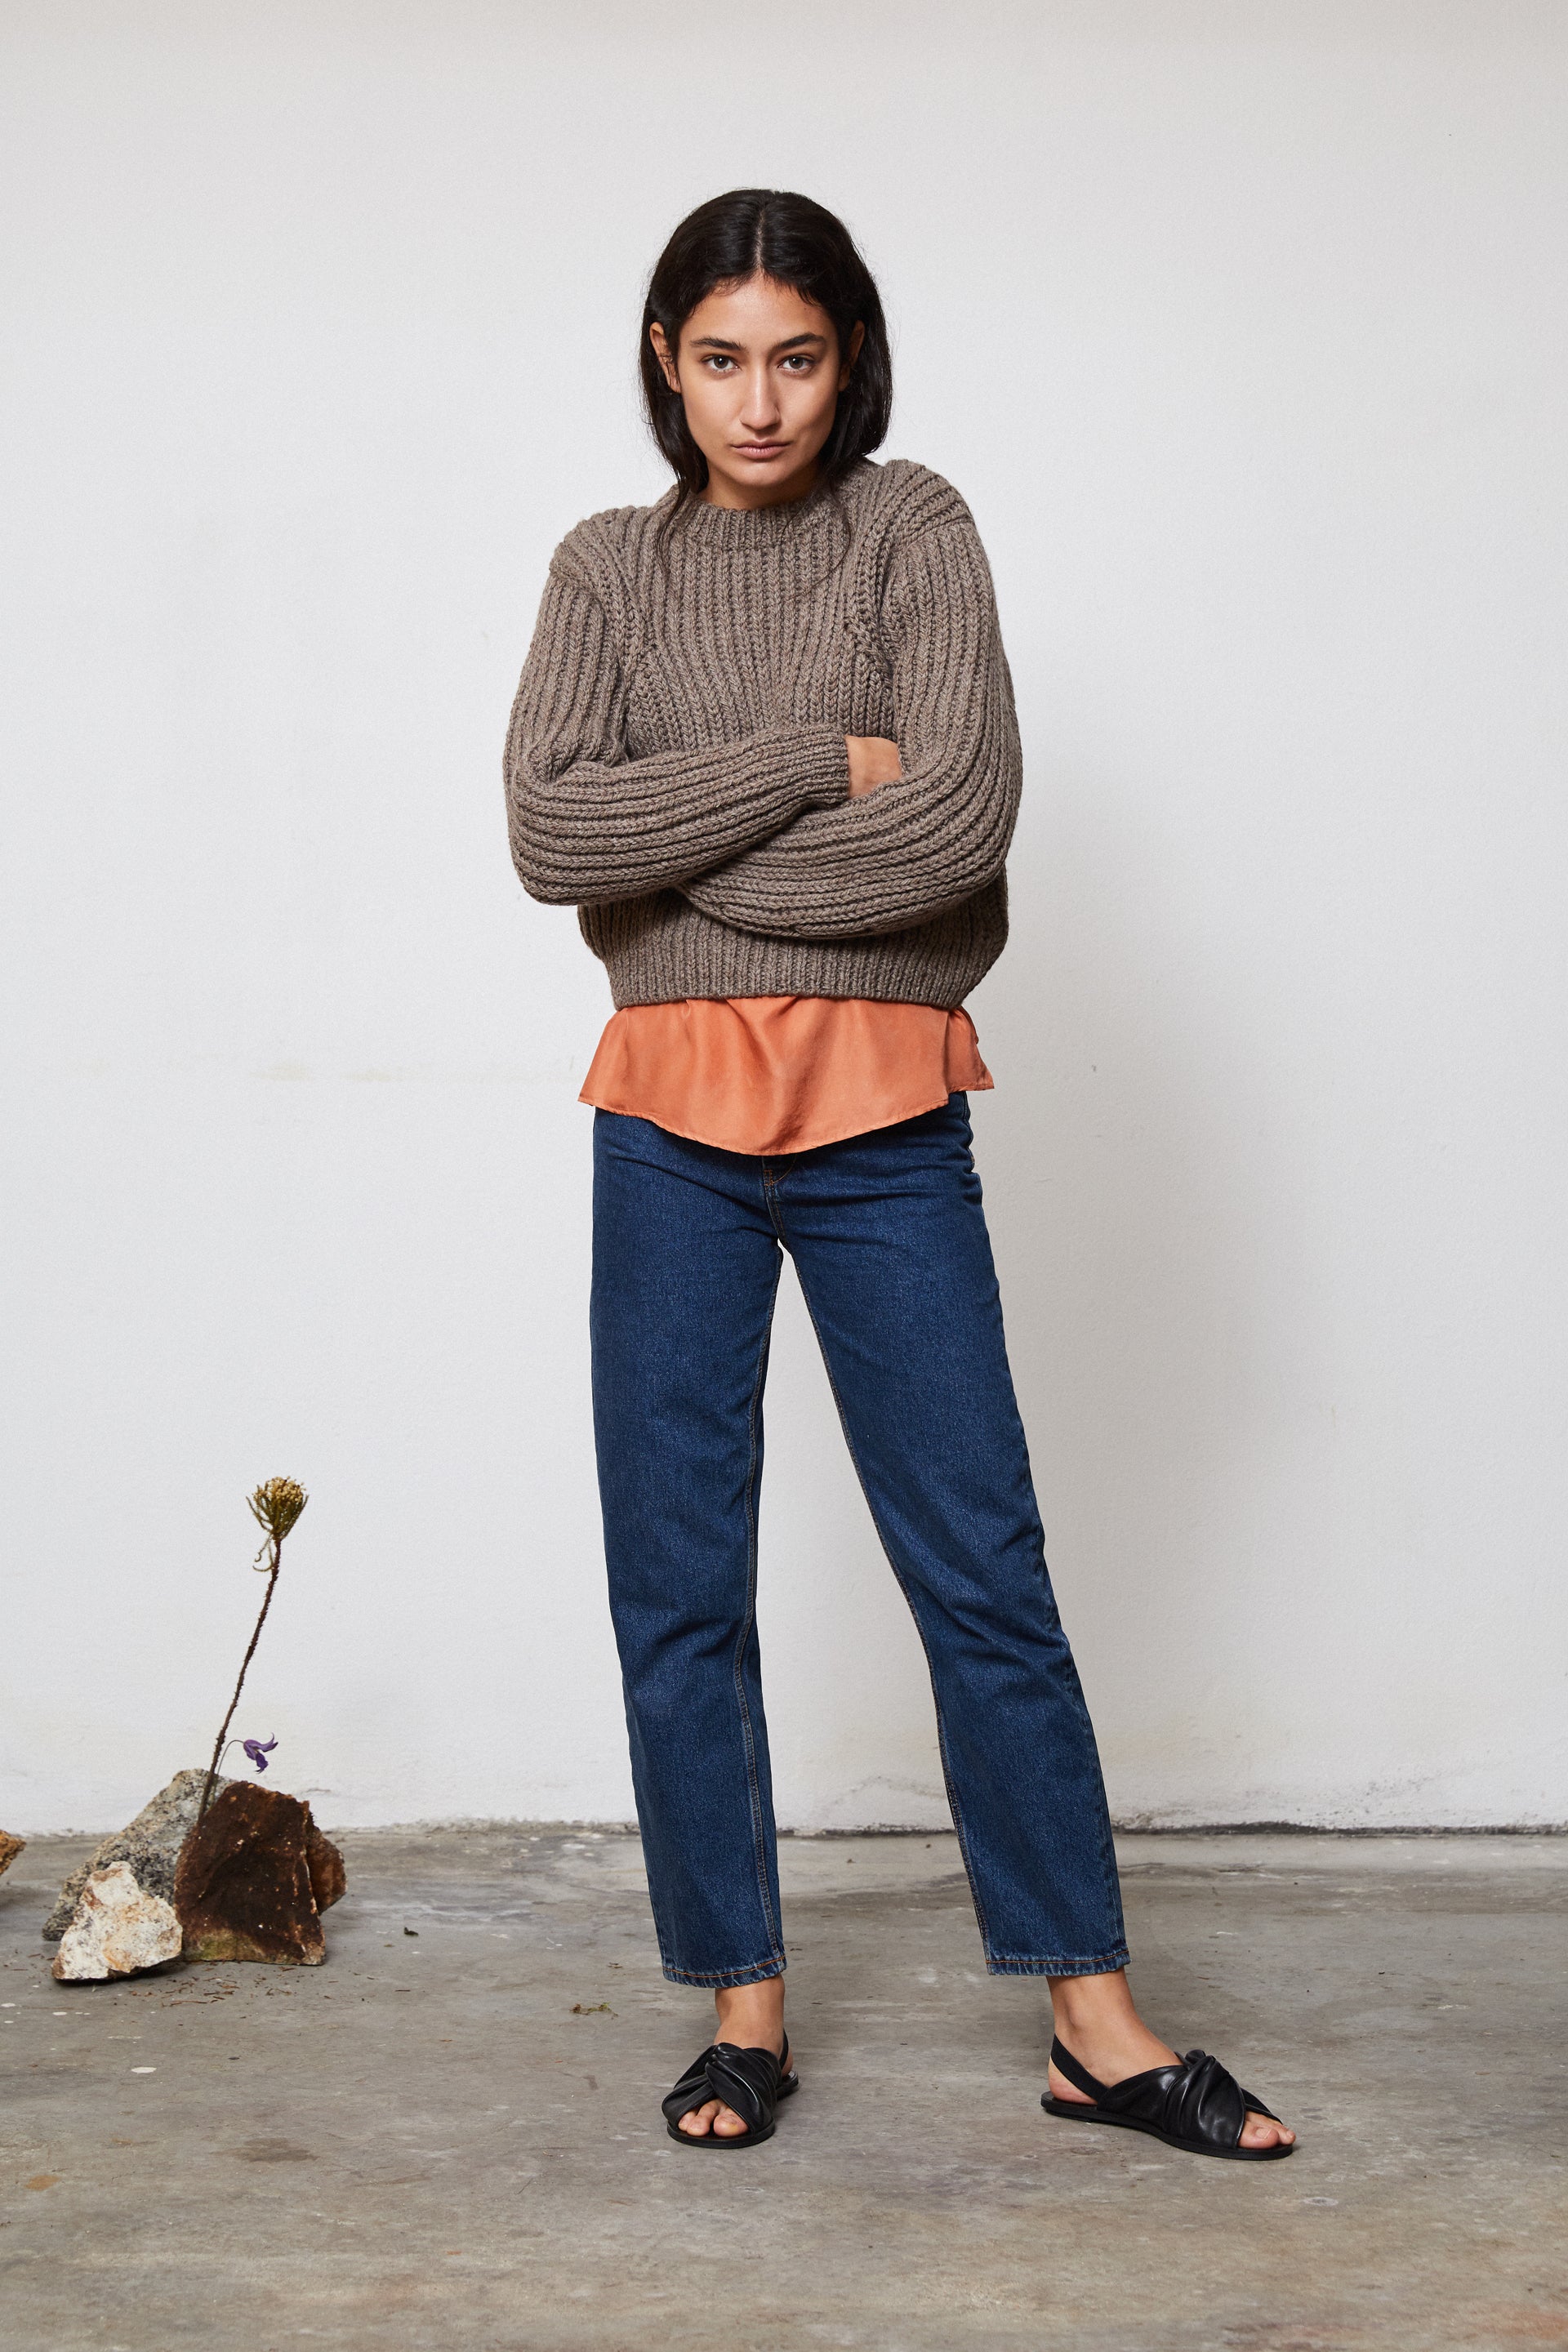 UNDYED, WOOL, HAND KNITTED, JUMPER, SWEATER, FISHERMAN RIBB, STYLISH, SUSTAINABLE, HAND-CRAFTED, WOMENSWEAR